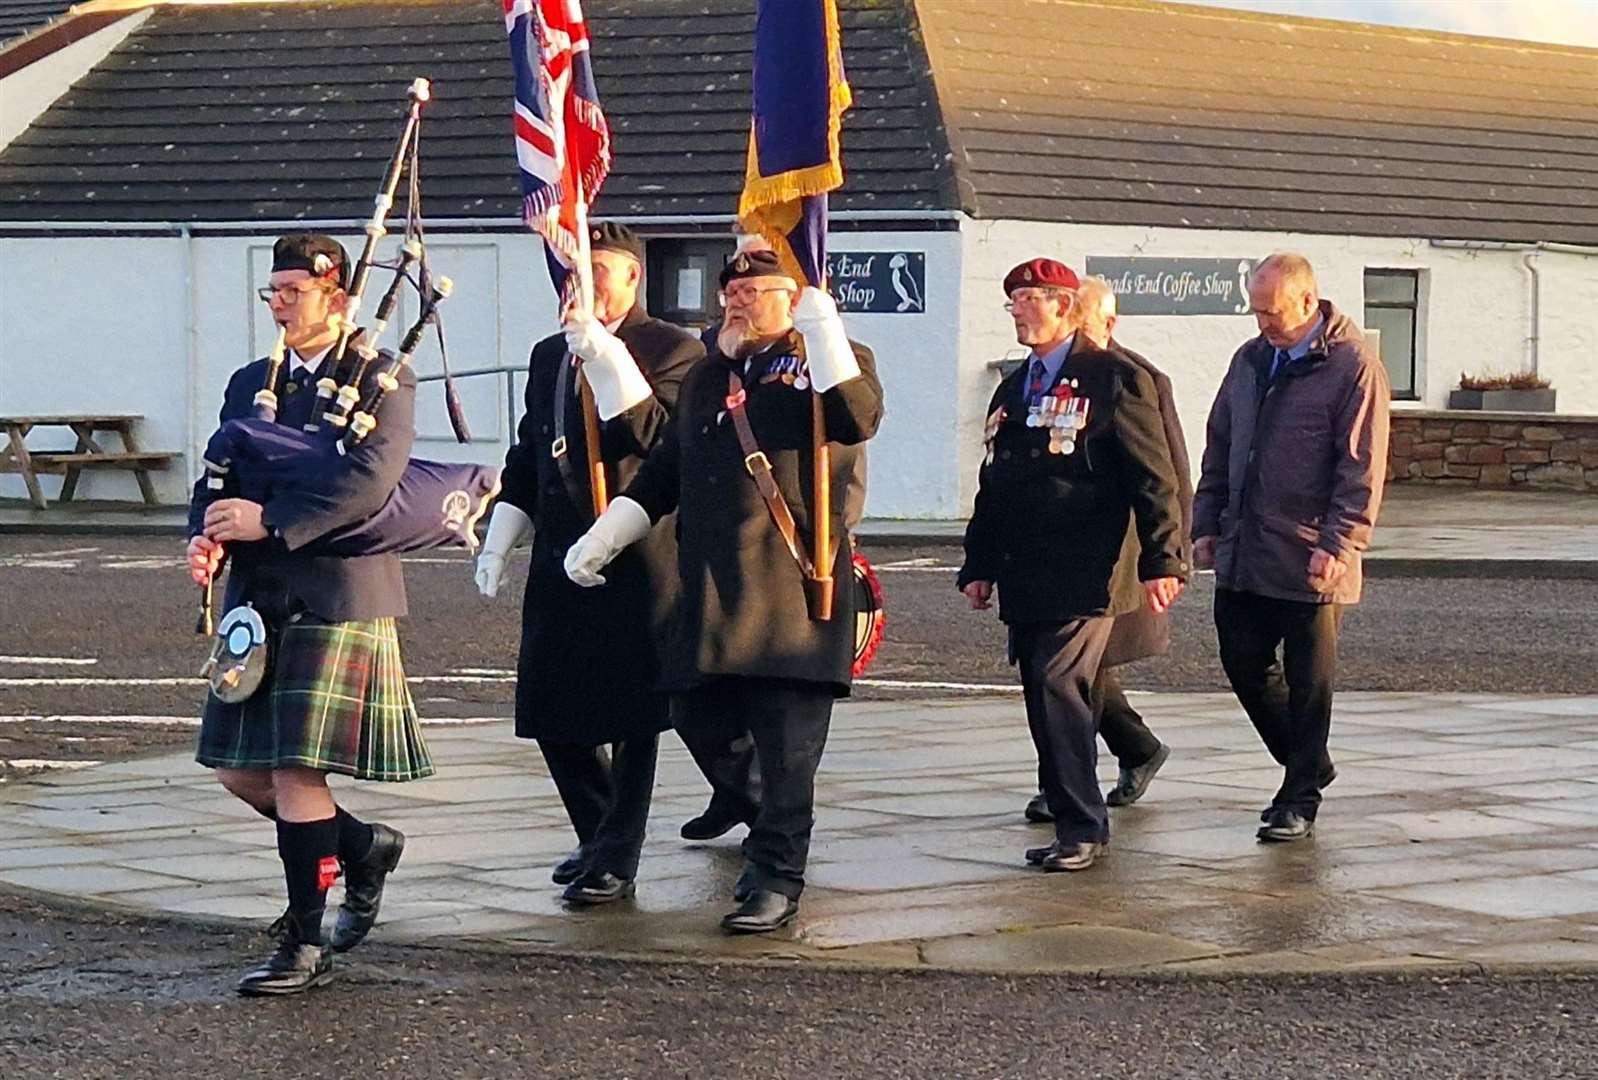 Piper Lewis MacLeod led a small group from the roundabout to the John O'Groats signpost.